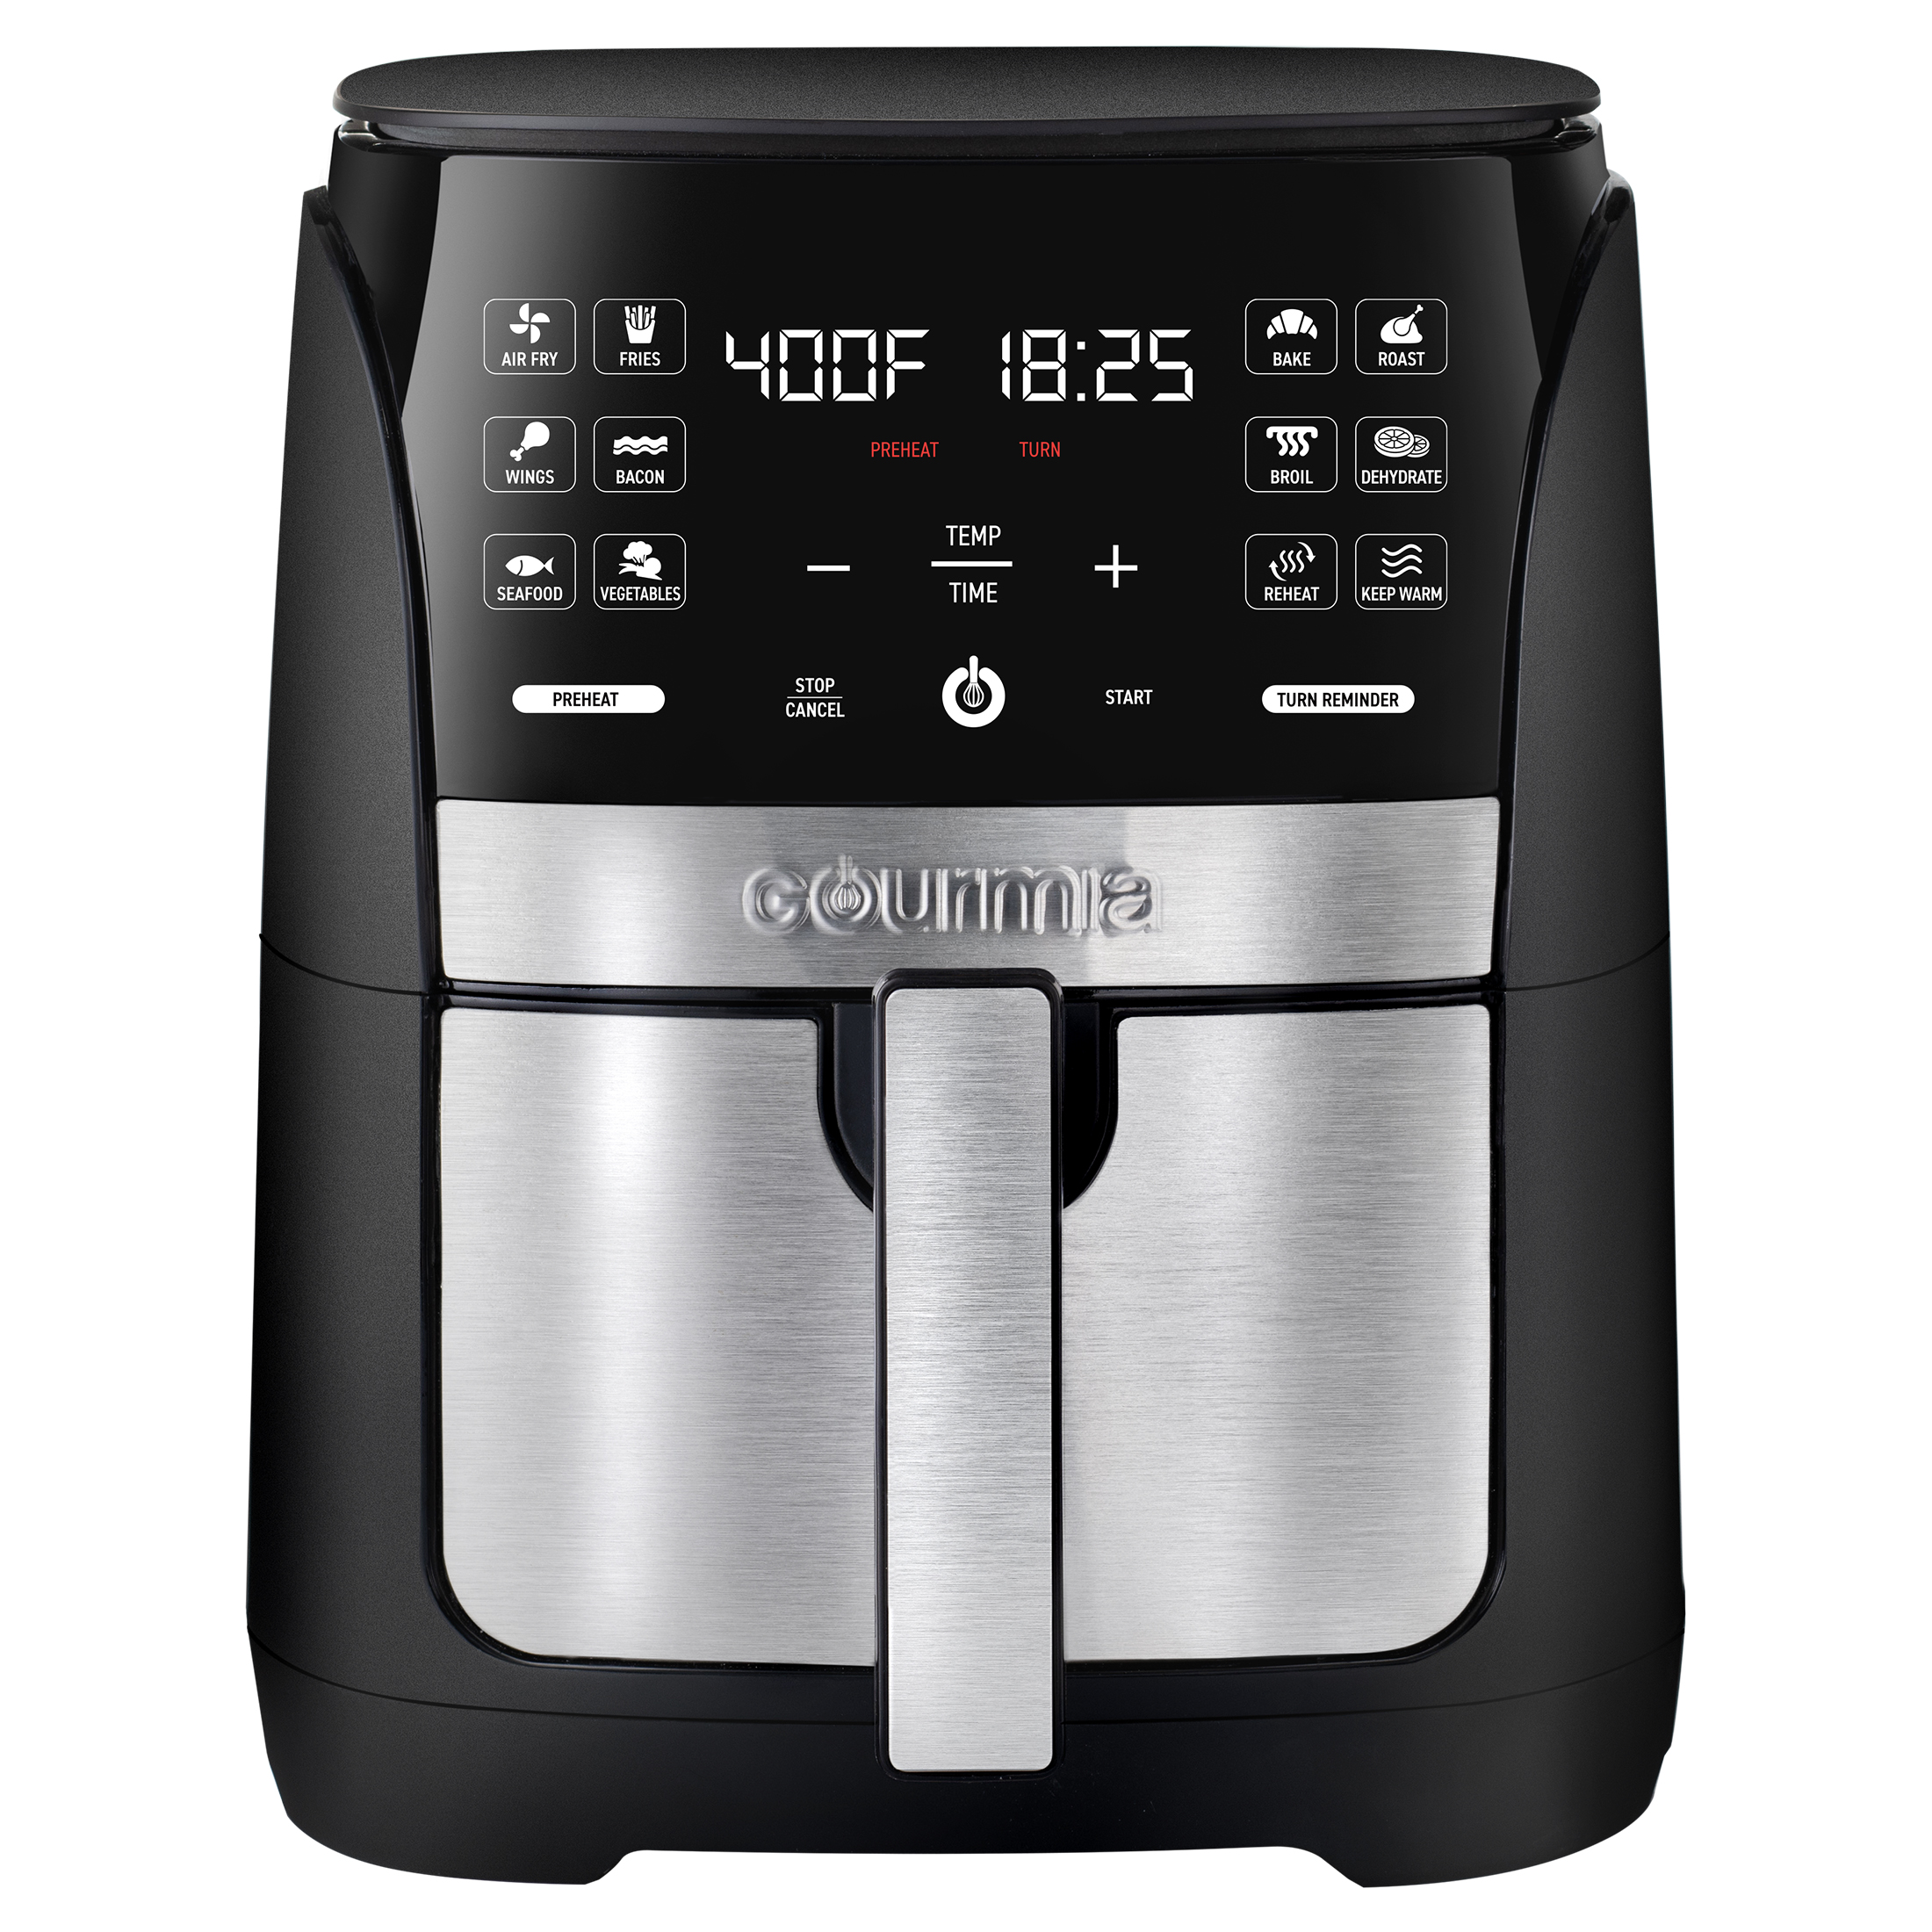 Gourmia 6 Qt Digital Air Fryer with Guided Cooking and 12 One-Touch Cooking Functions, 13.58 H, New - image 1 of 9